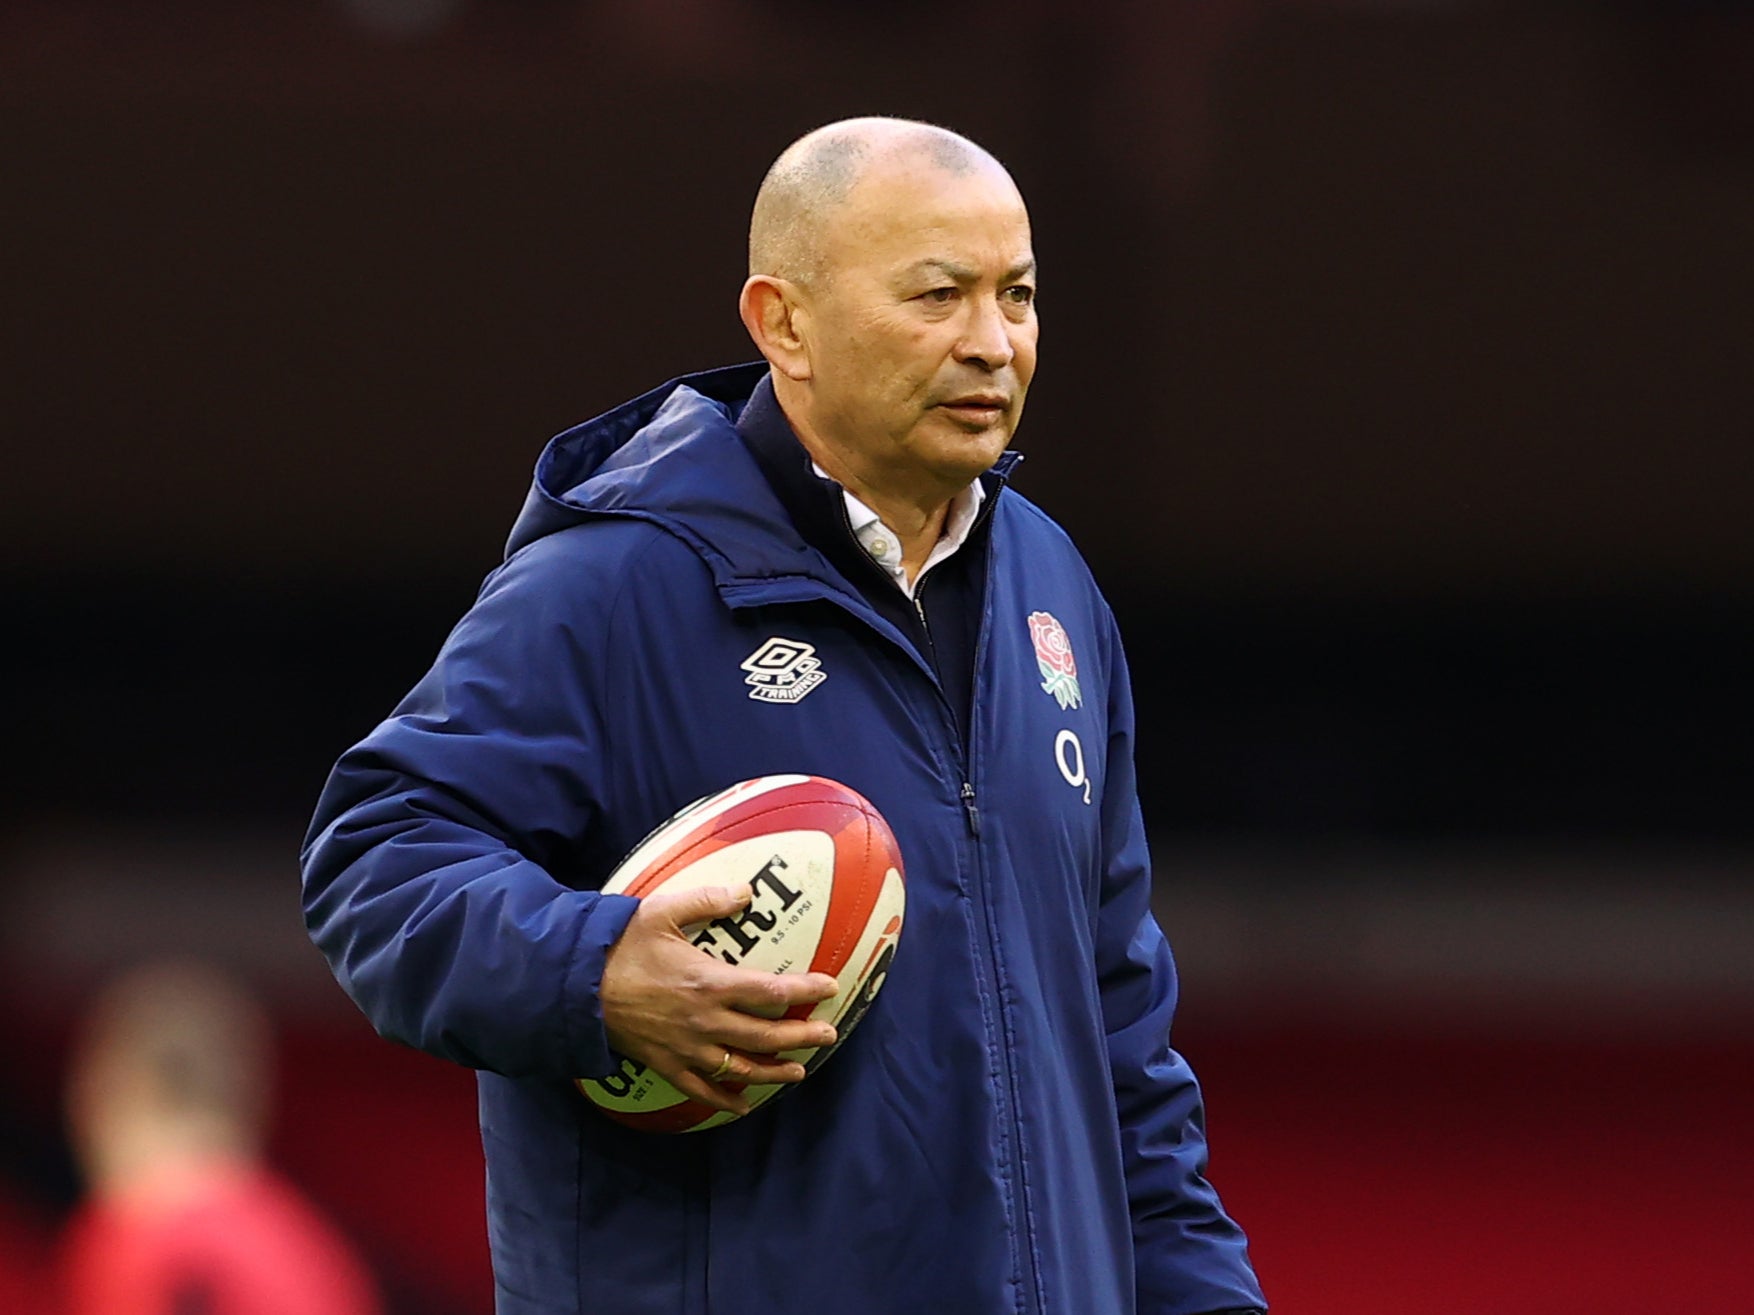 Eddie Jones believes England can still salvage their Six Nations campaign